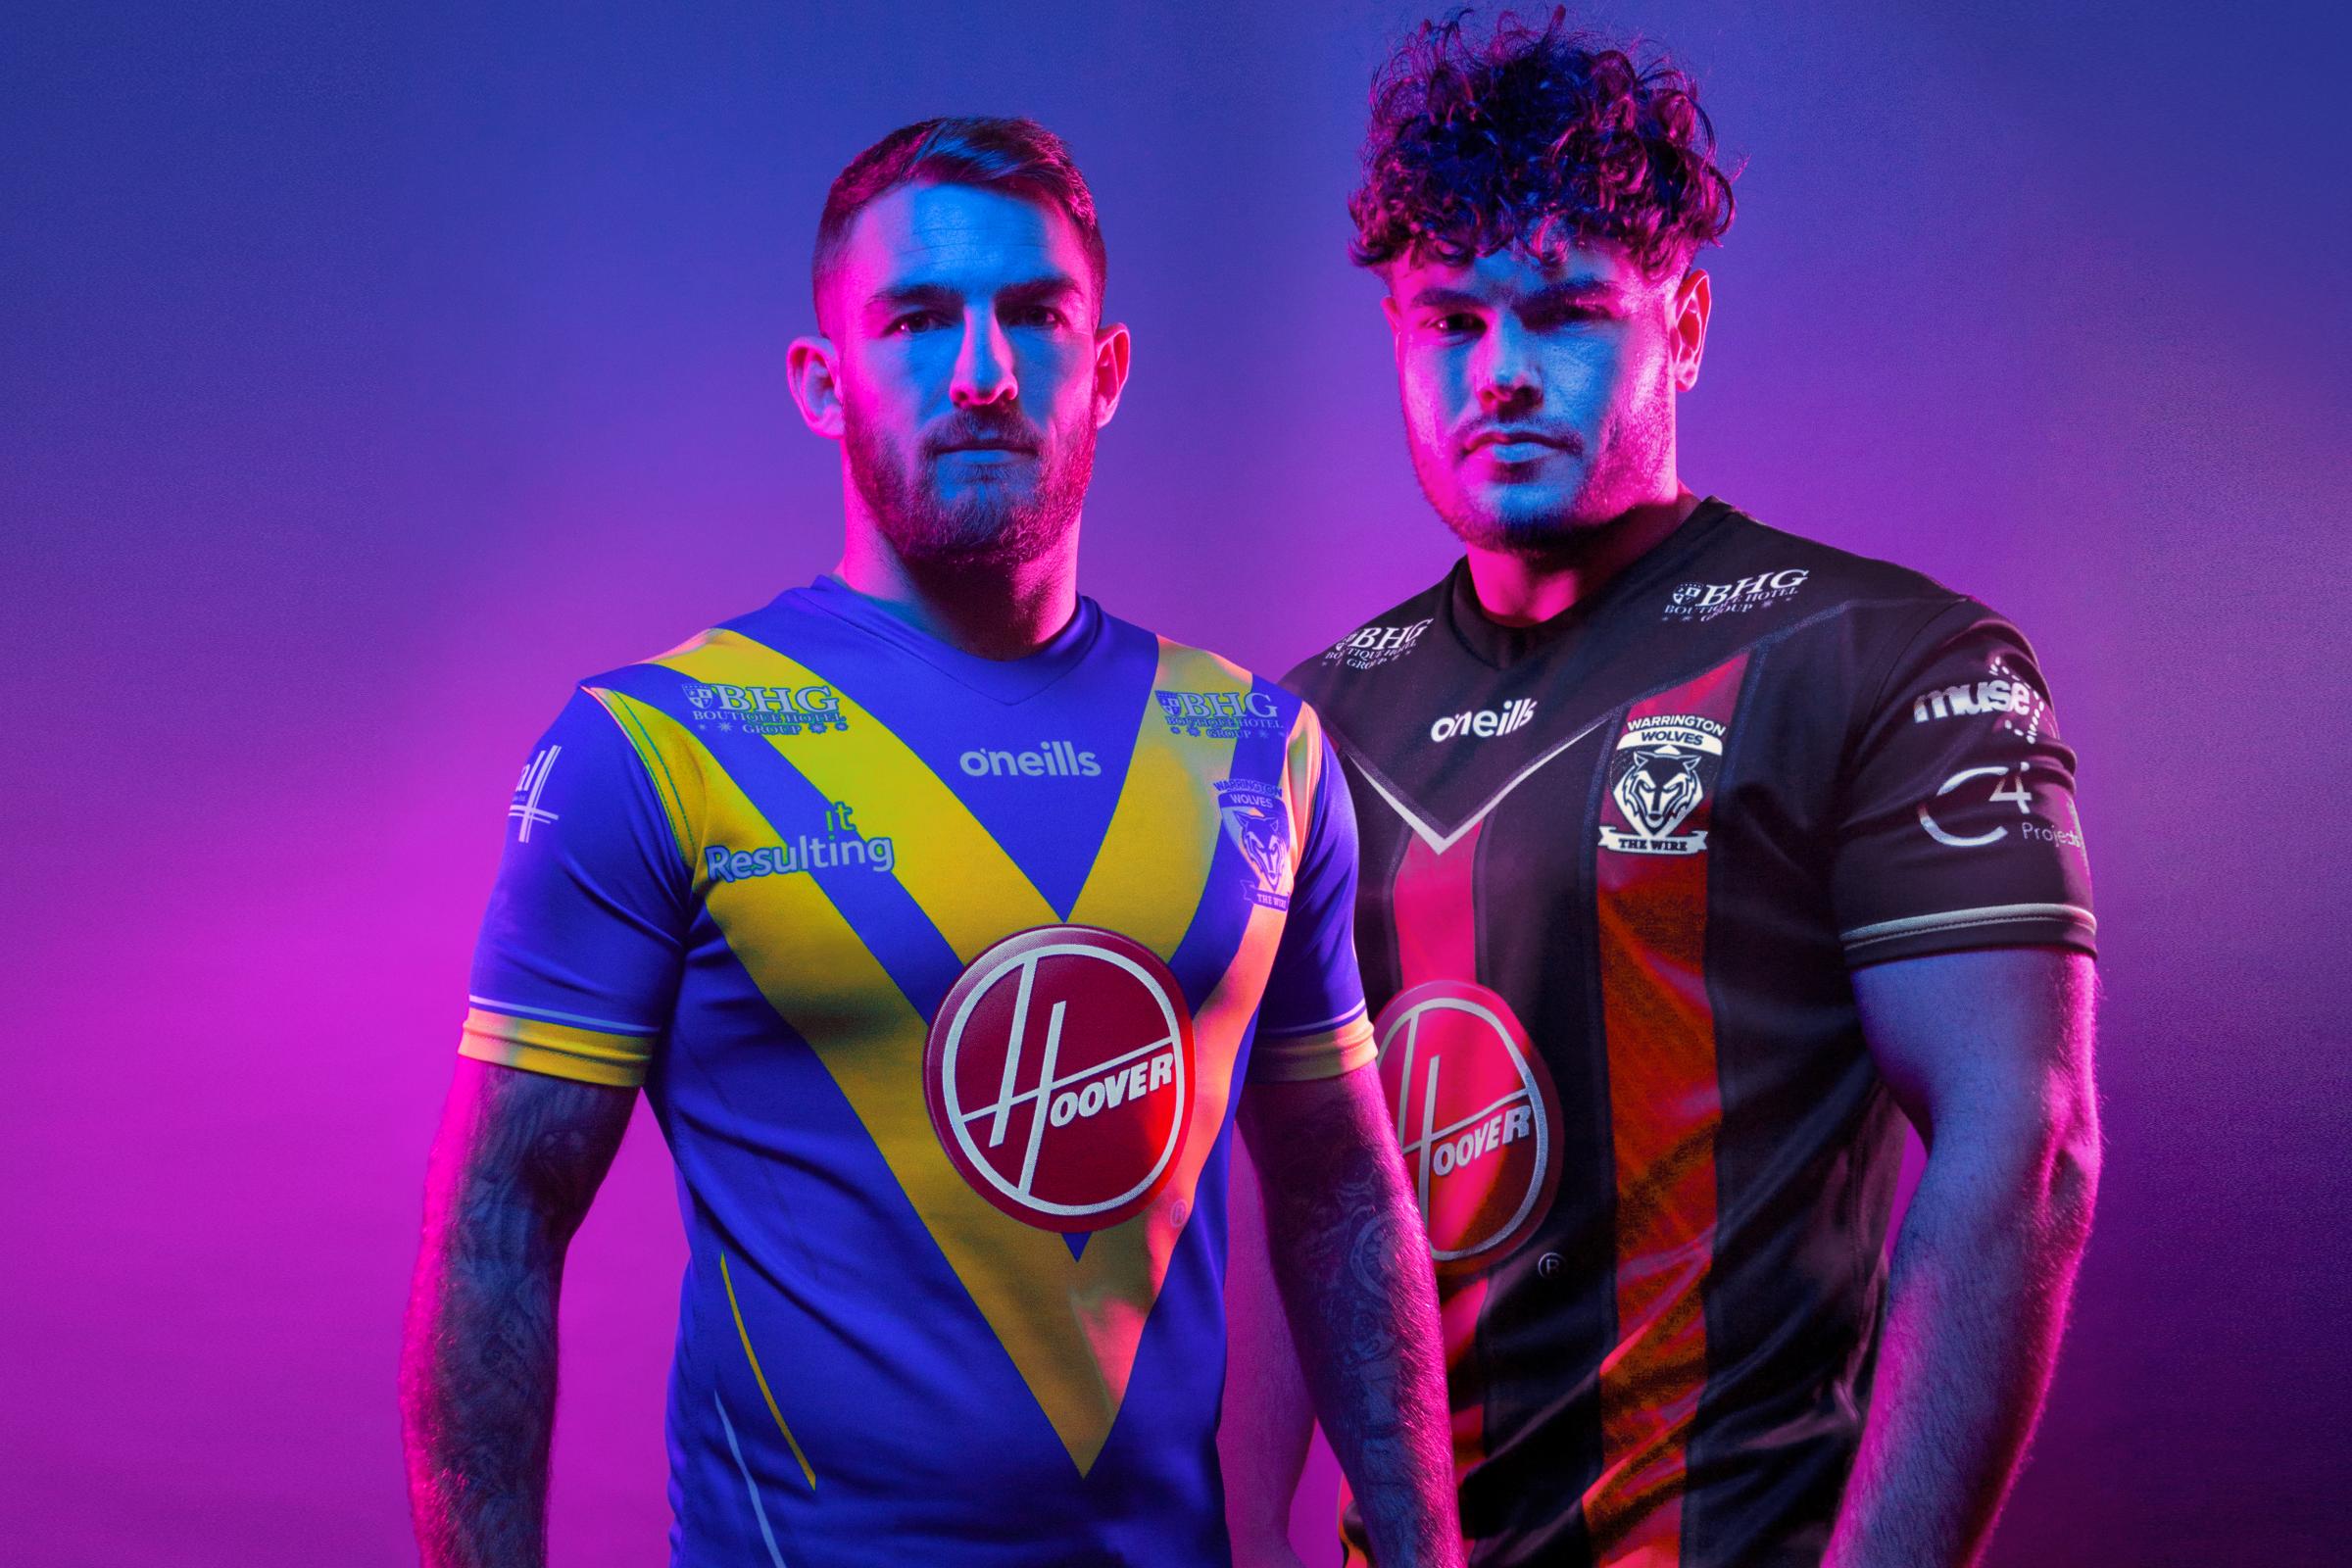 Competition to win 2020 Warrington Wolves home or away shirt